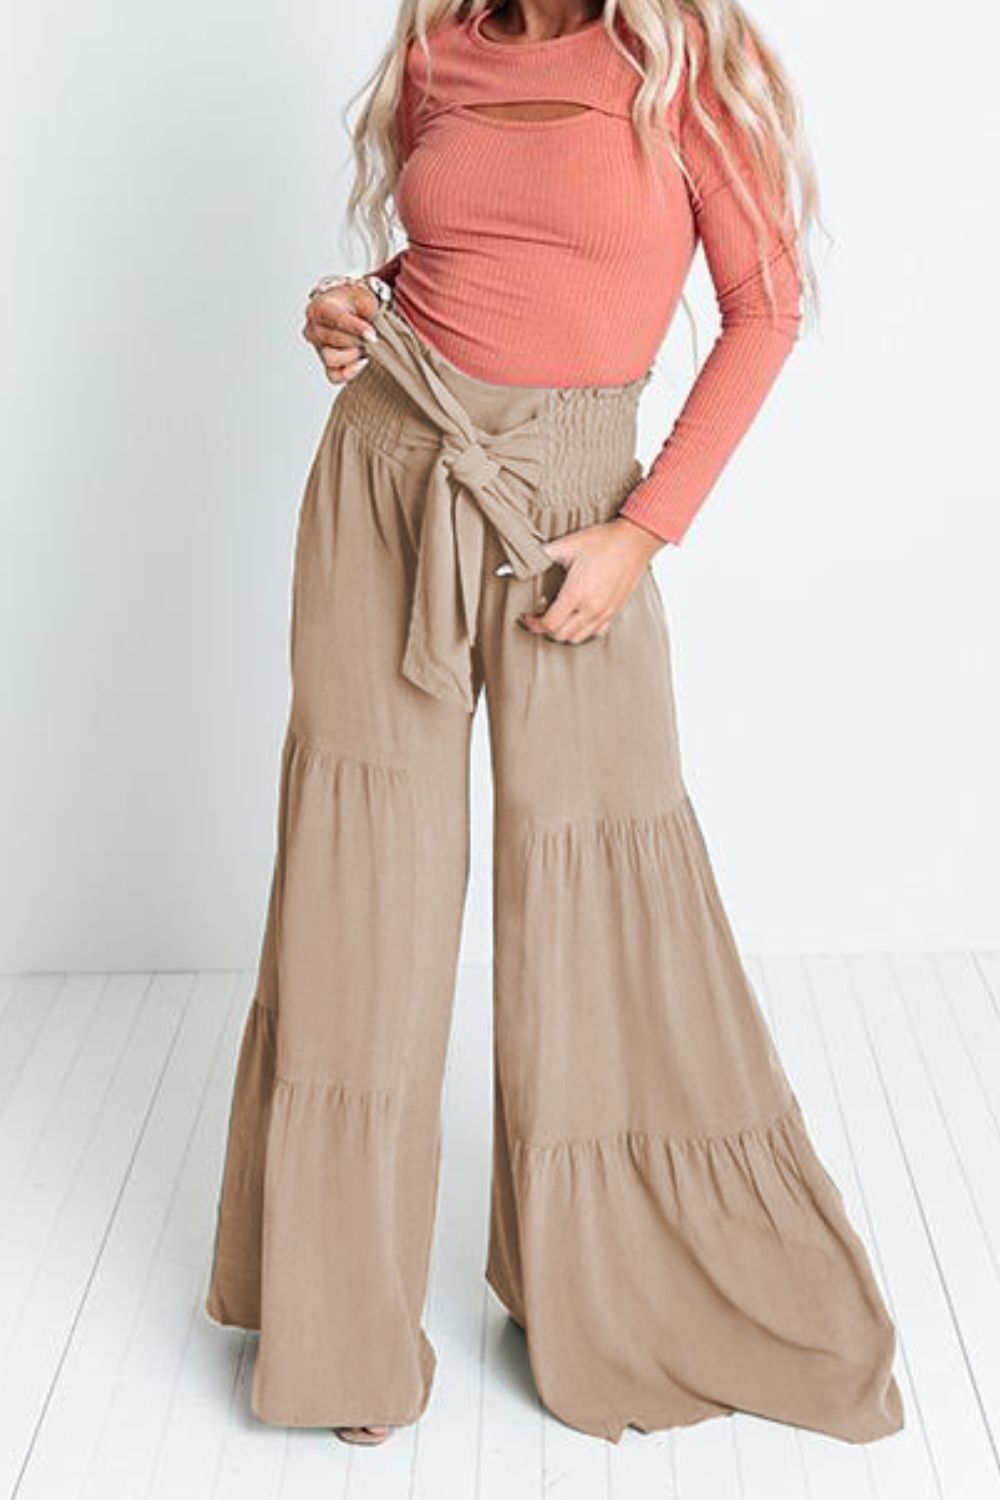 Tie Front Smocked Tiered Culottes - Pants - FITGGINS